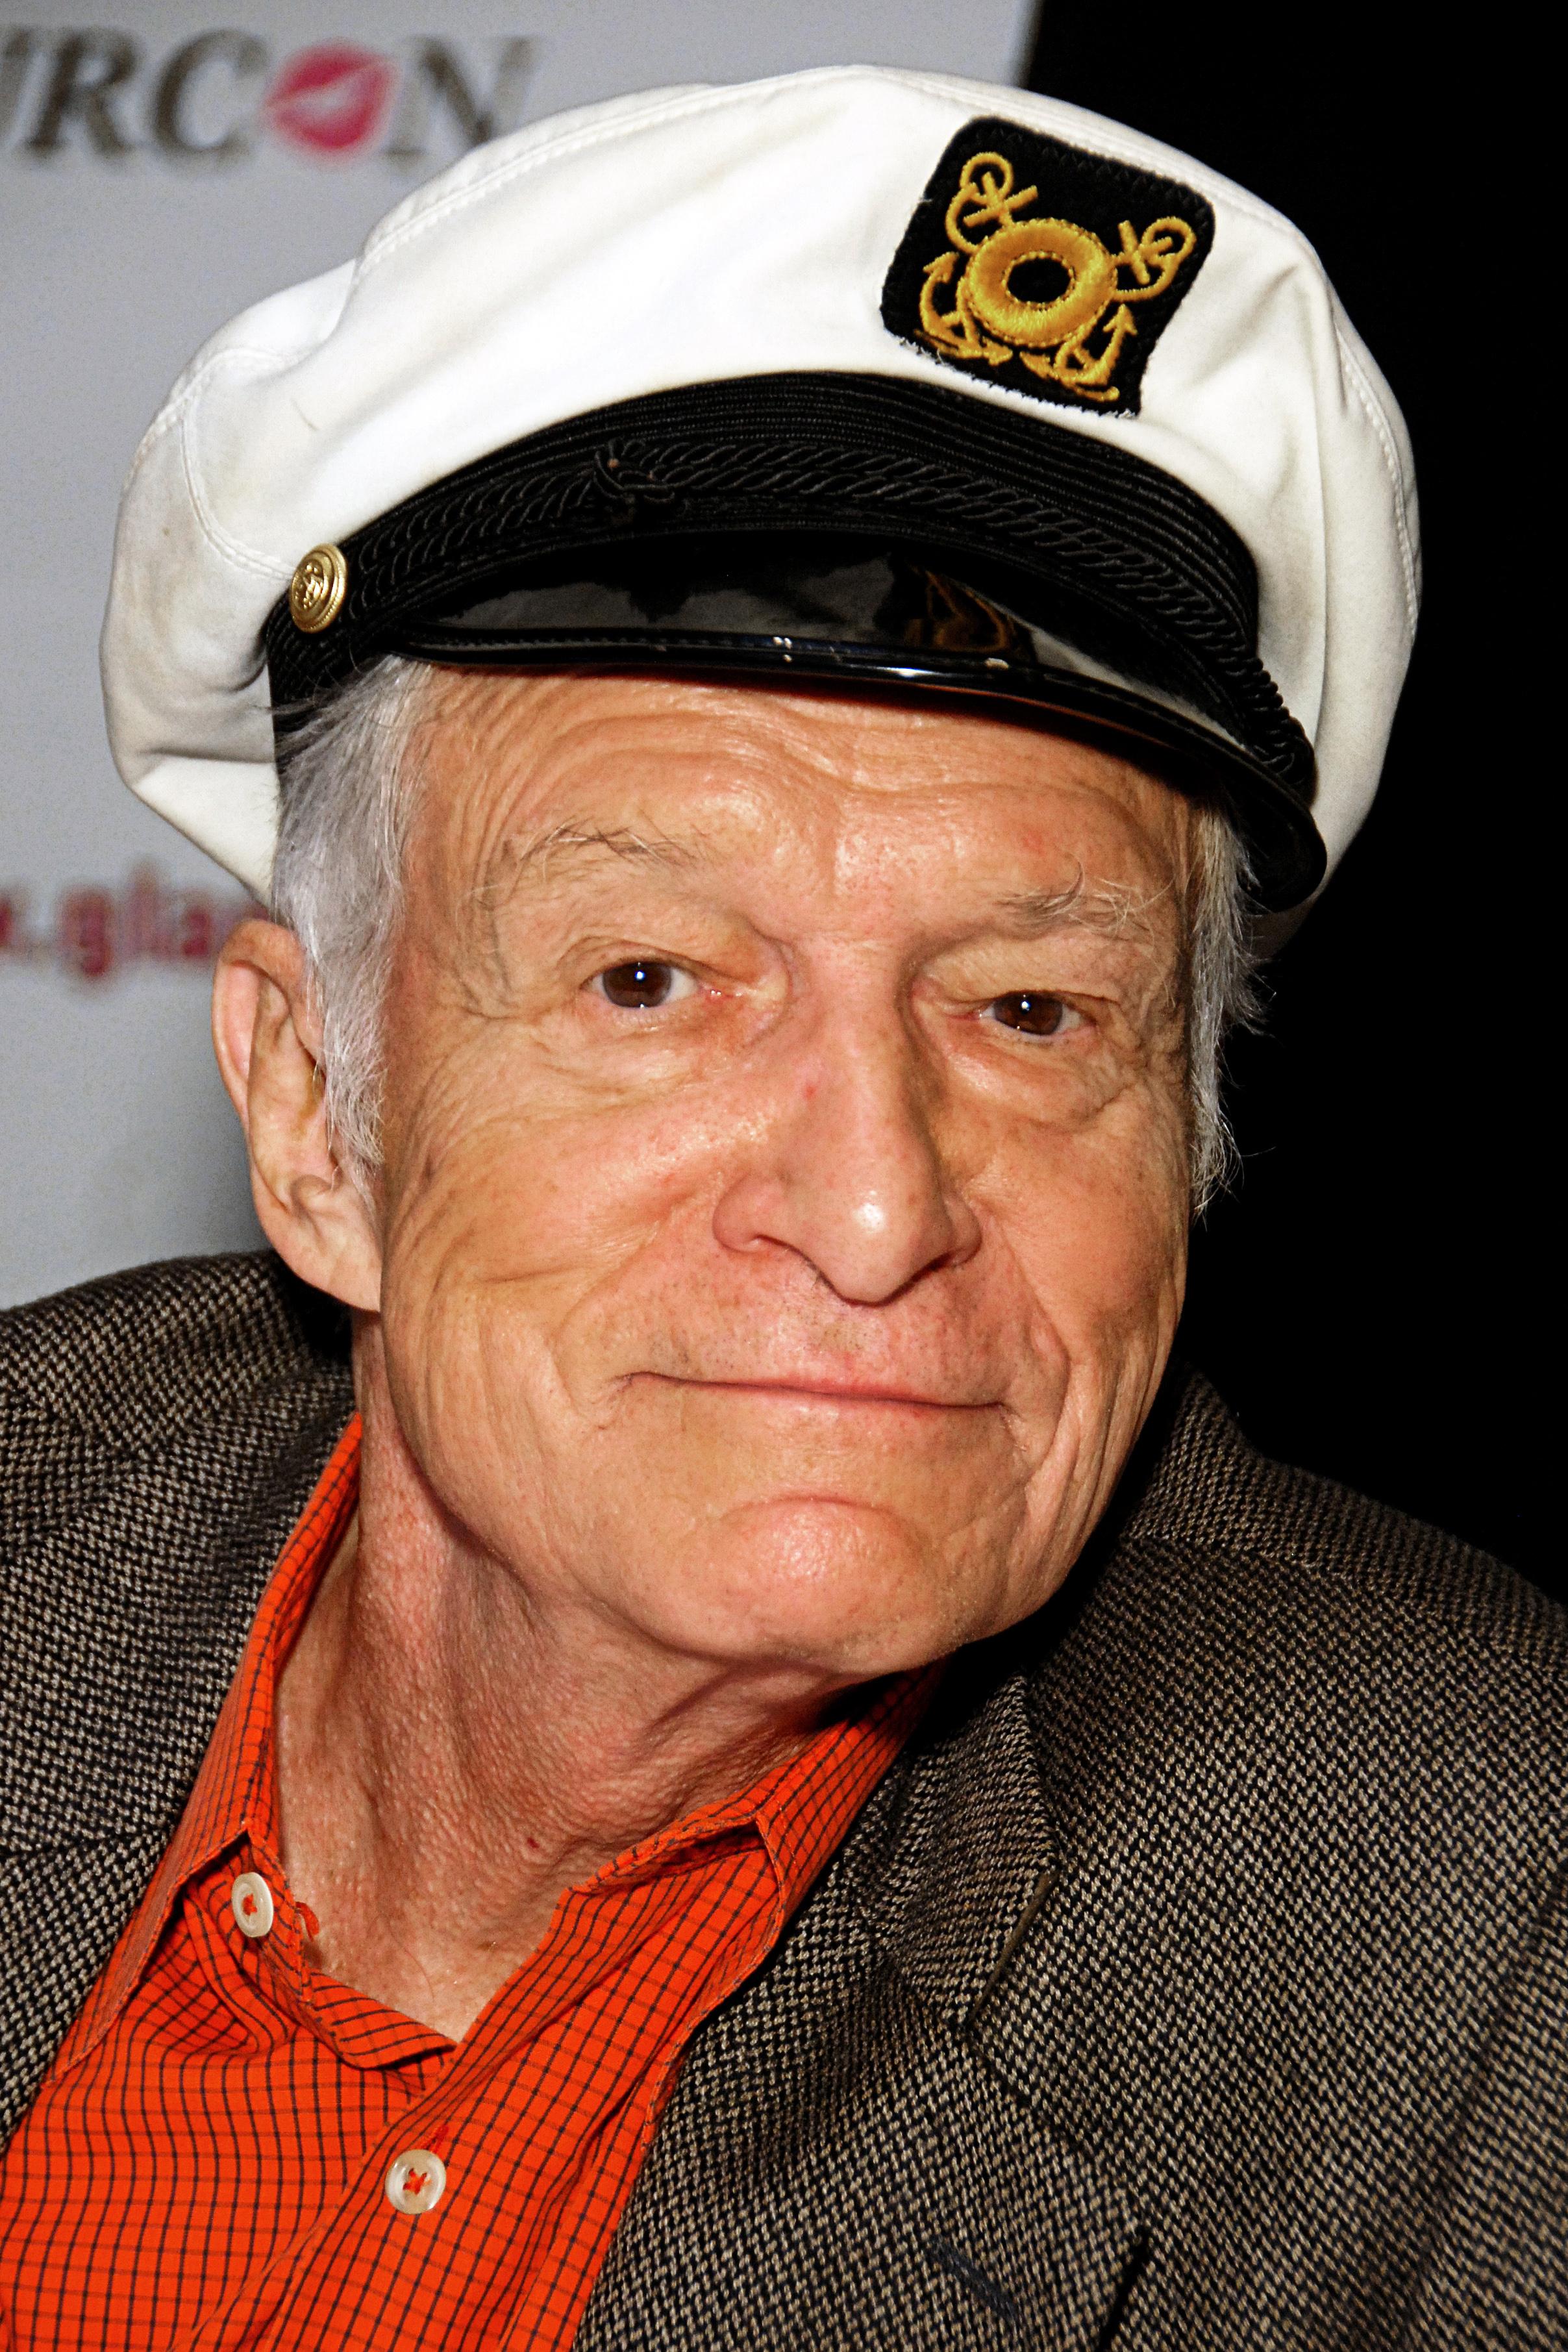 Hugh Hefner, Founder and CEO of Playboy, has passed away at the age